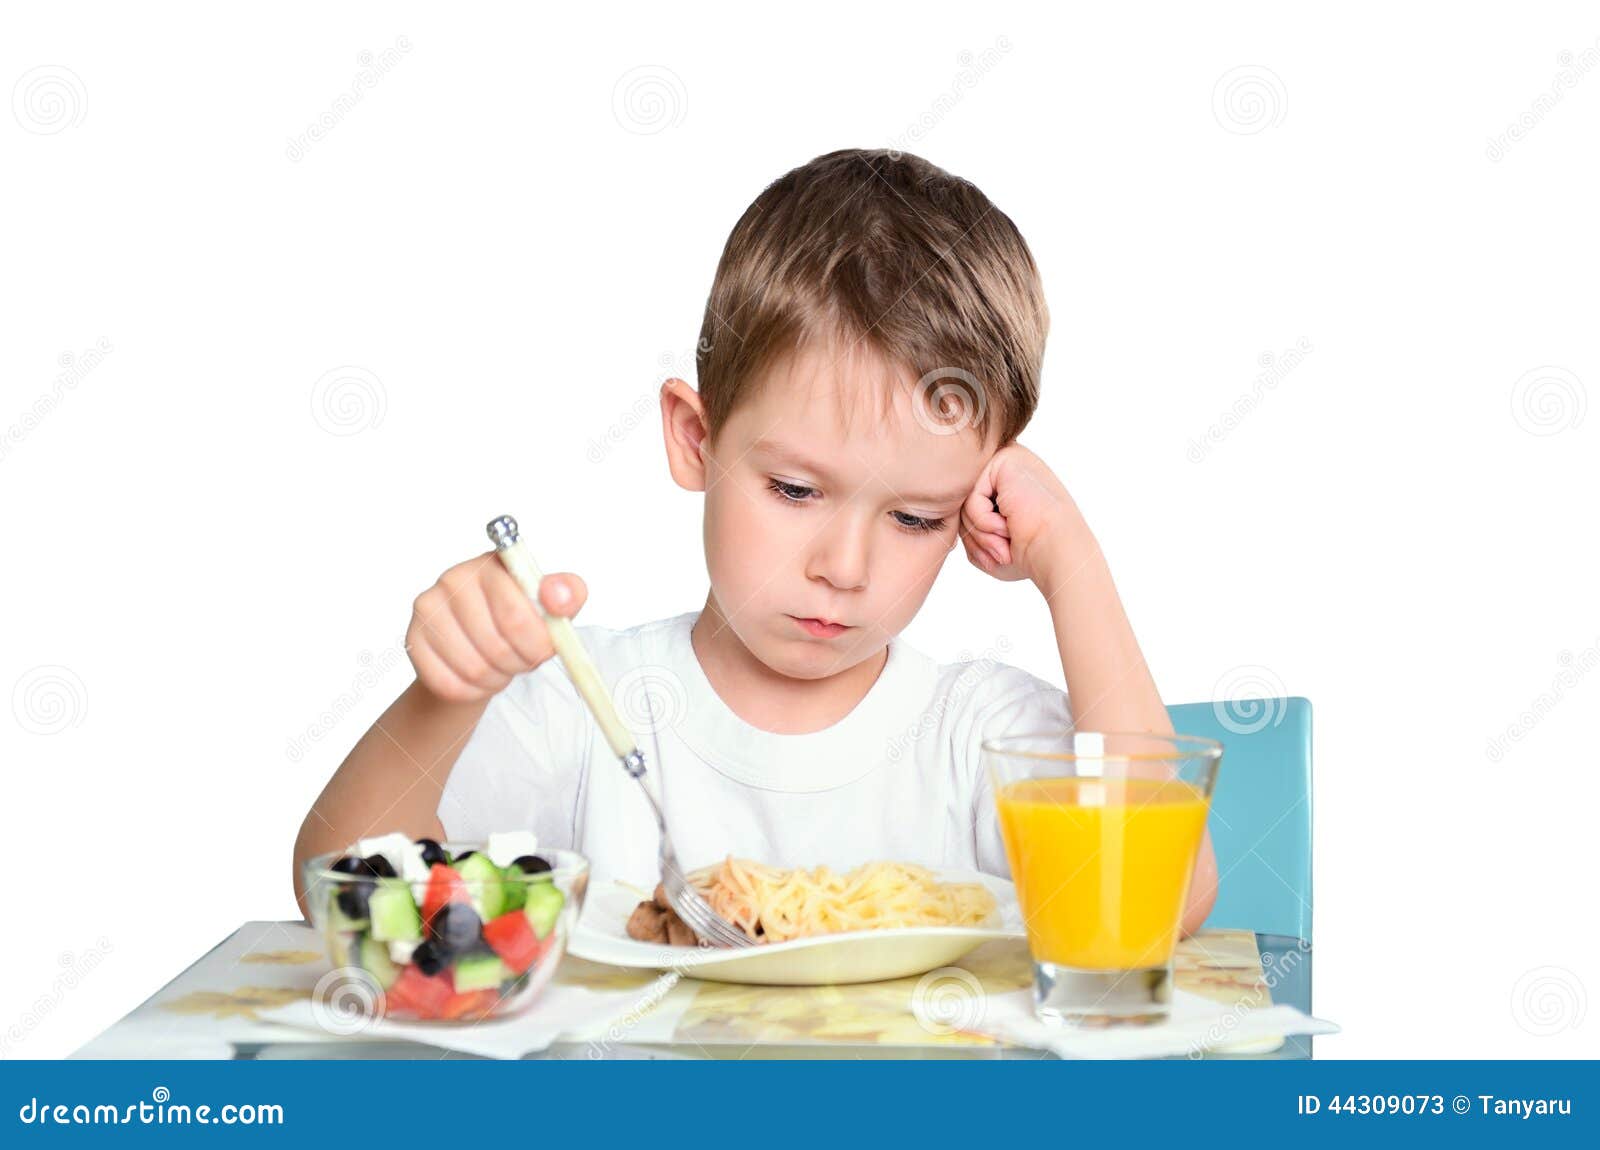 http://thumbs.dreamstime.com/z/sad-little-boy-sits-dining-table-lookin-looking-plate-isolated-white-background-horizontal-44309073.jpg